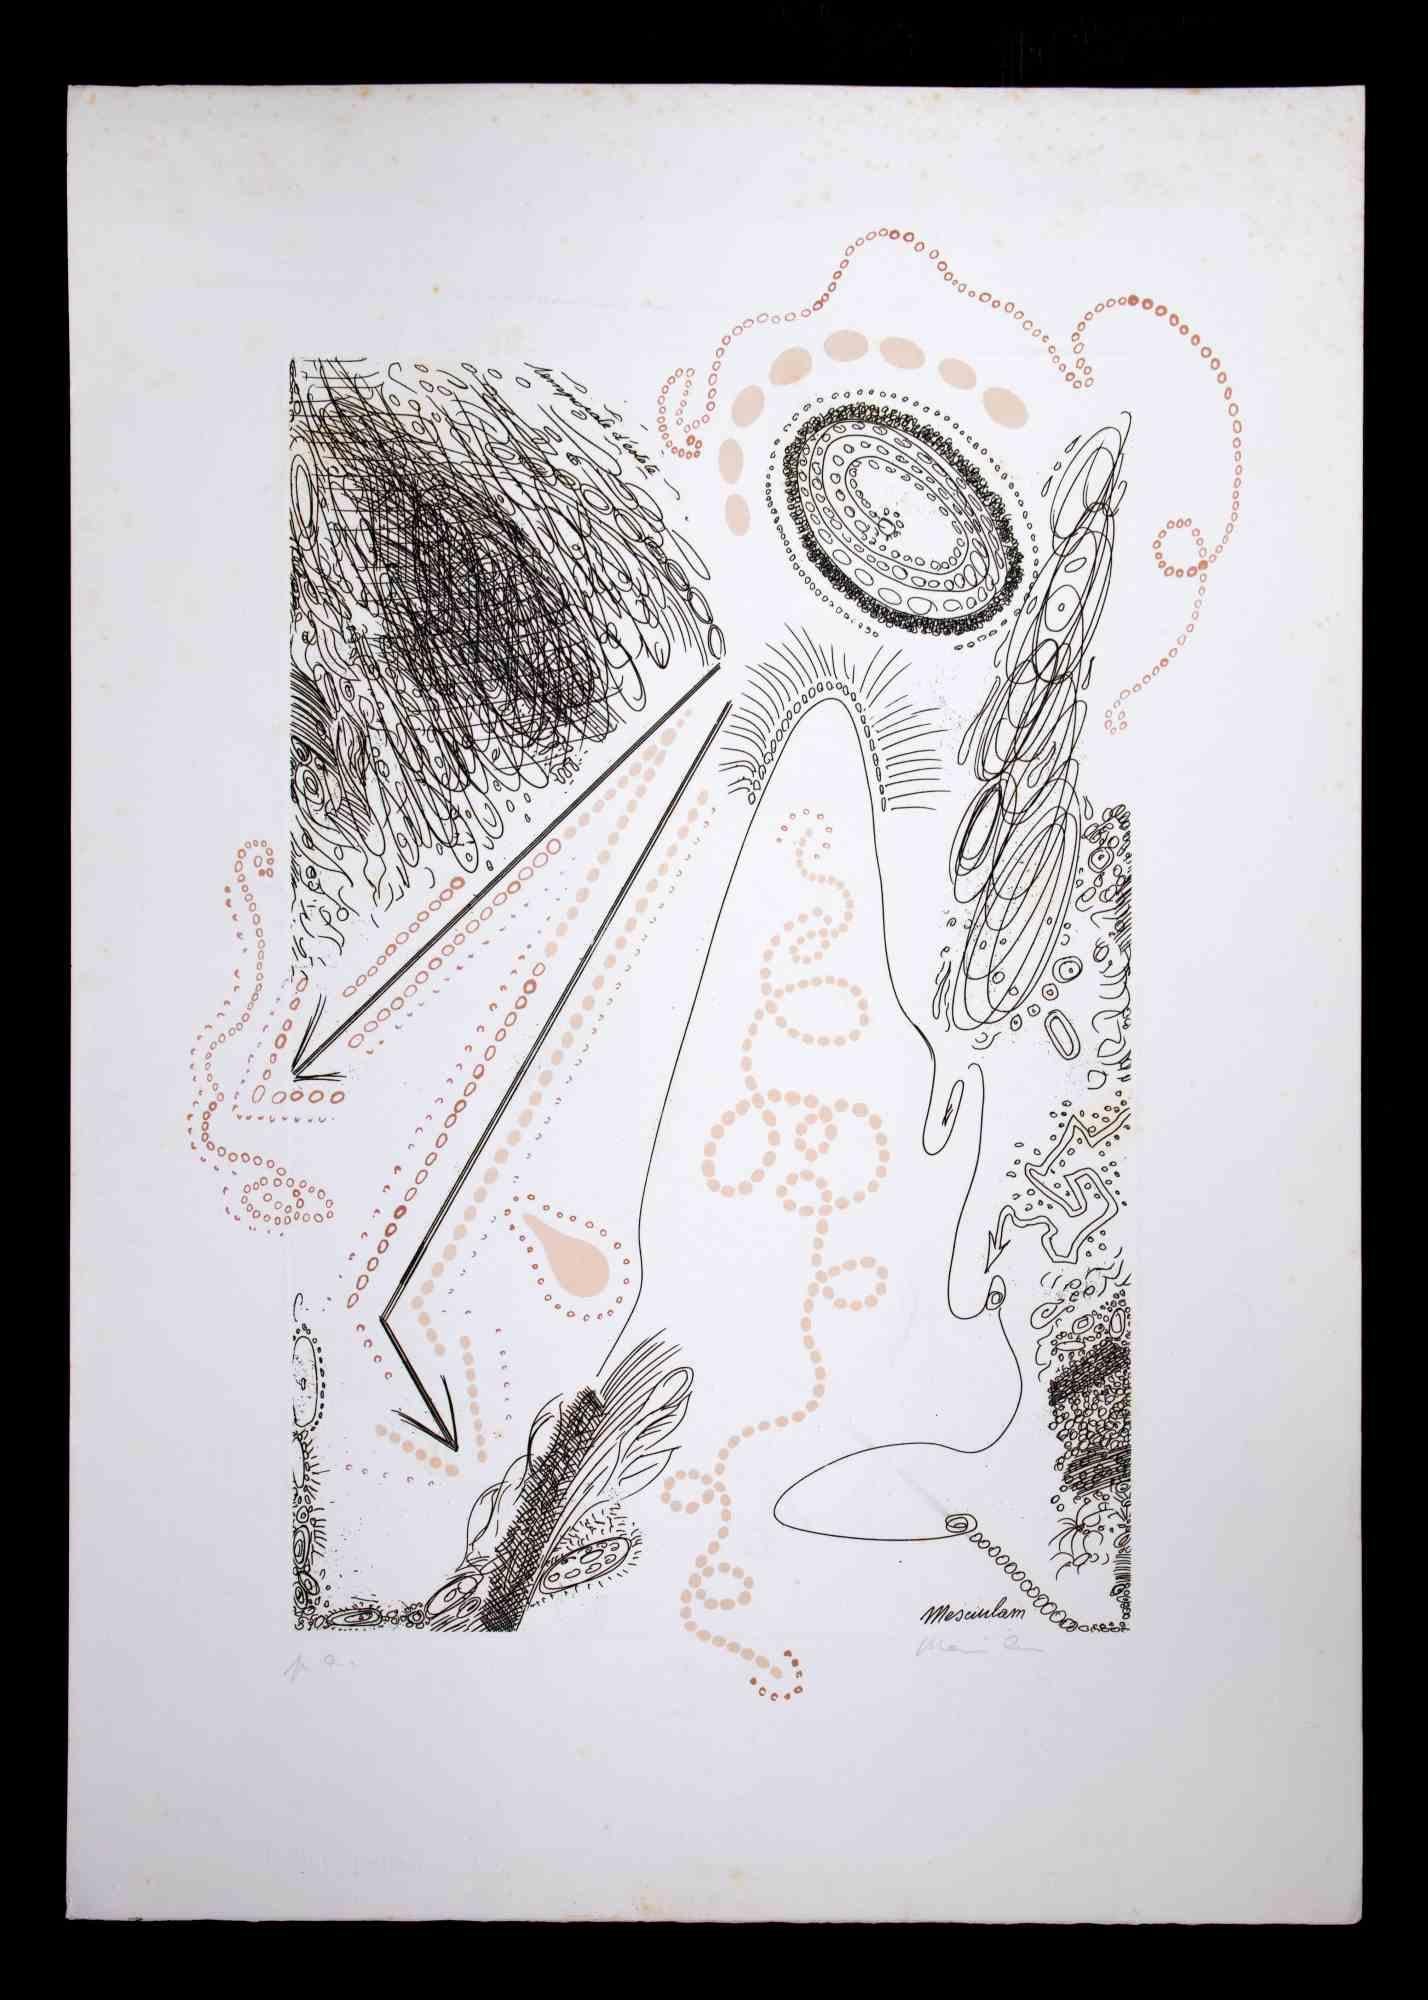 Abstract Composition is an Original Lithograph realized by Plinio Mesciulam in 1973.

Very good condition on a white cardboard.

Hand-signed and numbered by the artist on the lower margin.

Plinio Mesciulam (23 December 1926 - 19 May 2021) was an